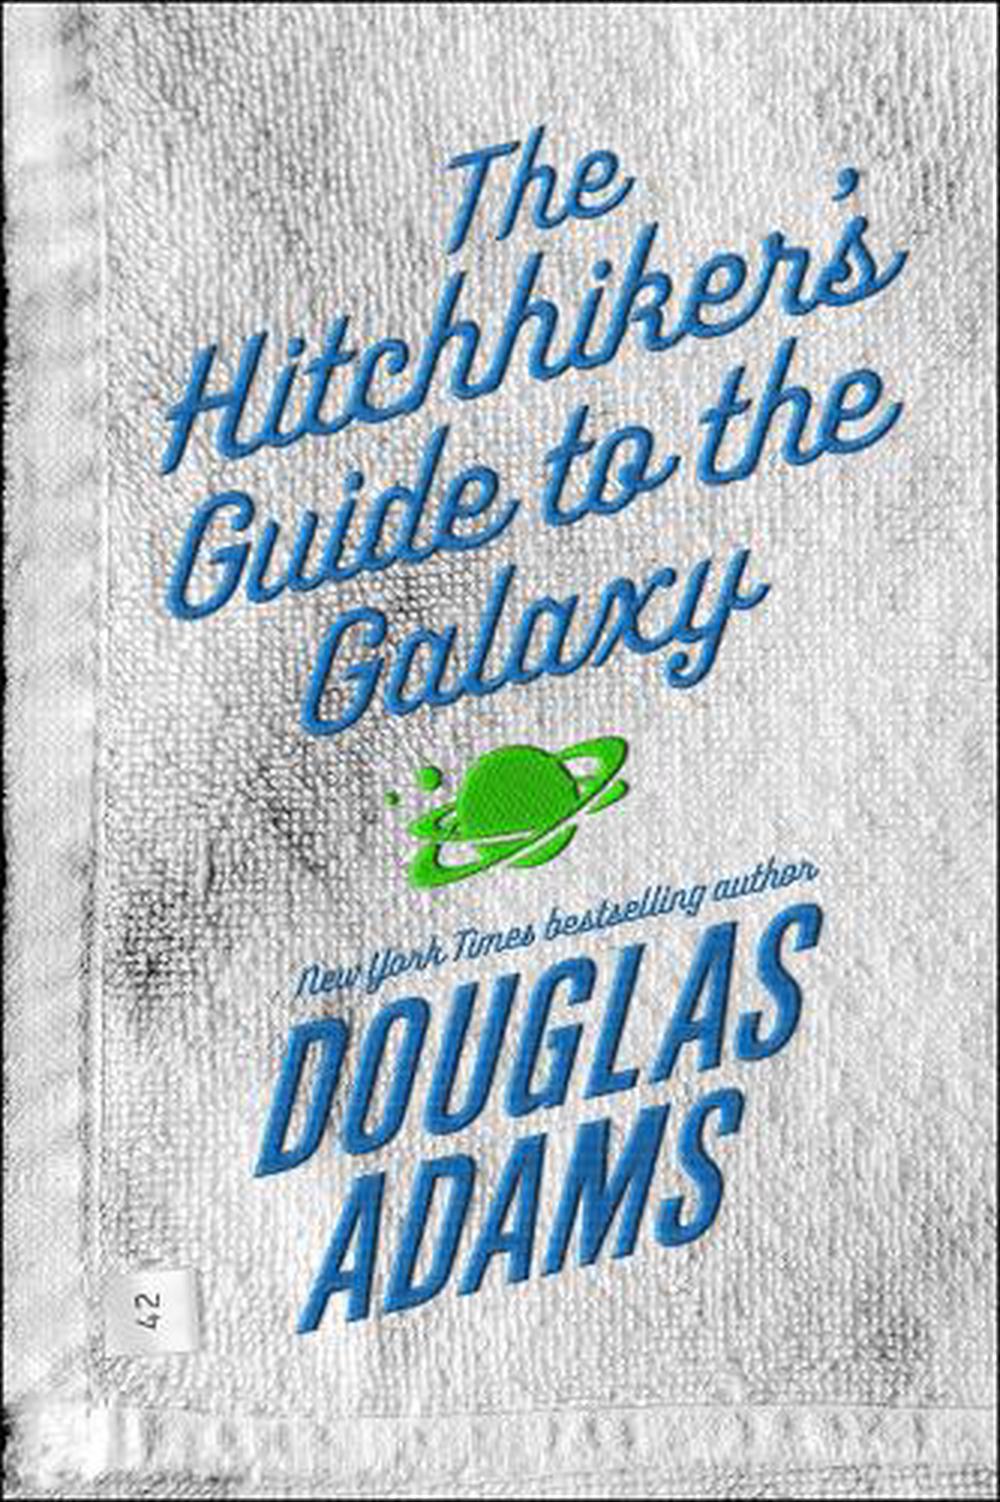 The Hitchhiker's Guide to the Galaxy by Douglas Adams, Paperback